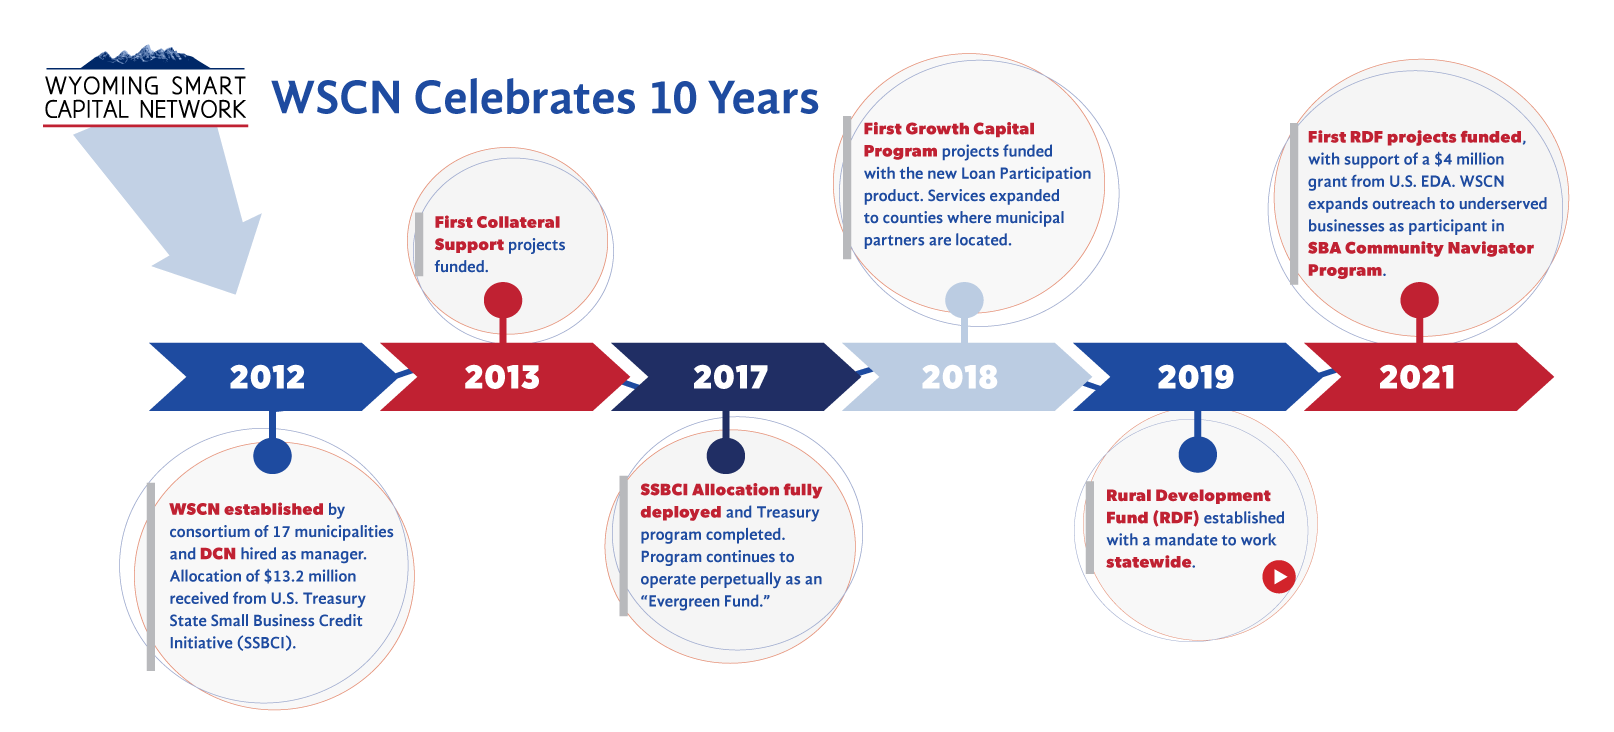 WSCN celebrates 10 years. Timeline from 2012 to 2021. 2012: WSCN established by consortium of 17 municipalities and DCN hired as manager  Allocation of  13 2 million received from U.S. Treasury State Small Business Credit Initiative (SSBCI). 2013: First Collateral Support projects funded. 2017: SSBCI Allocation fully deployed and Treasury program completed. Program continues to operate perpetually as an 'Evergreen Fund'. 2018: First Growth Capital Program projects funded with the new Loan Participation product. Services expanded to counties where municipal partners are located. 2019: Rural Development Fund (RDF) established with a mandate to work statewide (link to wyomingrdf.org). 2021: First RDF projects funded, with support of a $4 million grant from U.S. EDA. WSCN expands outreach to underserved businesses as participant in SBA Community Navigator Program.